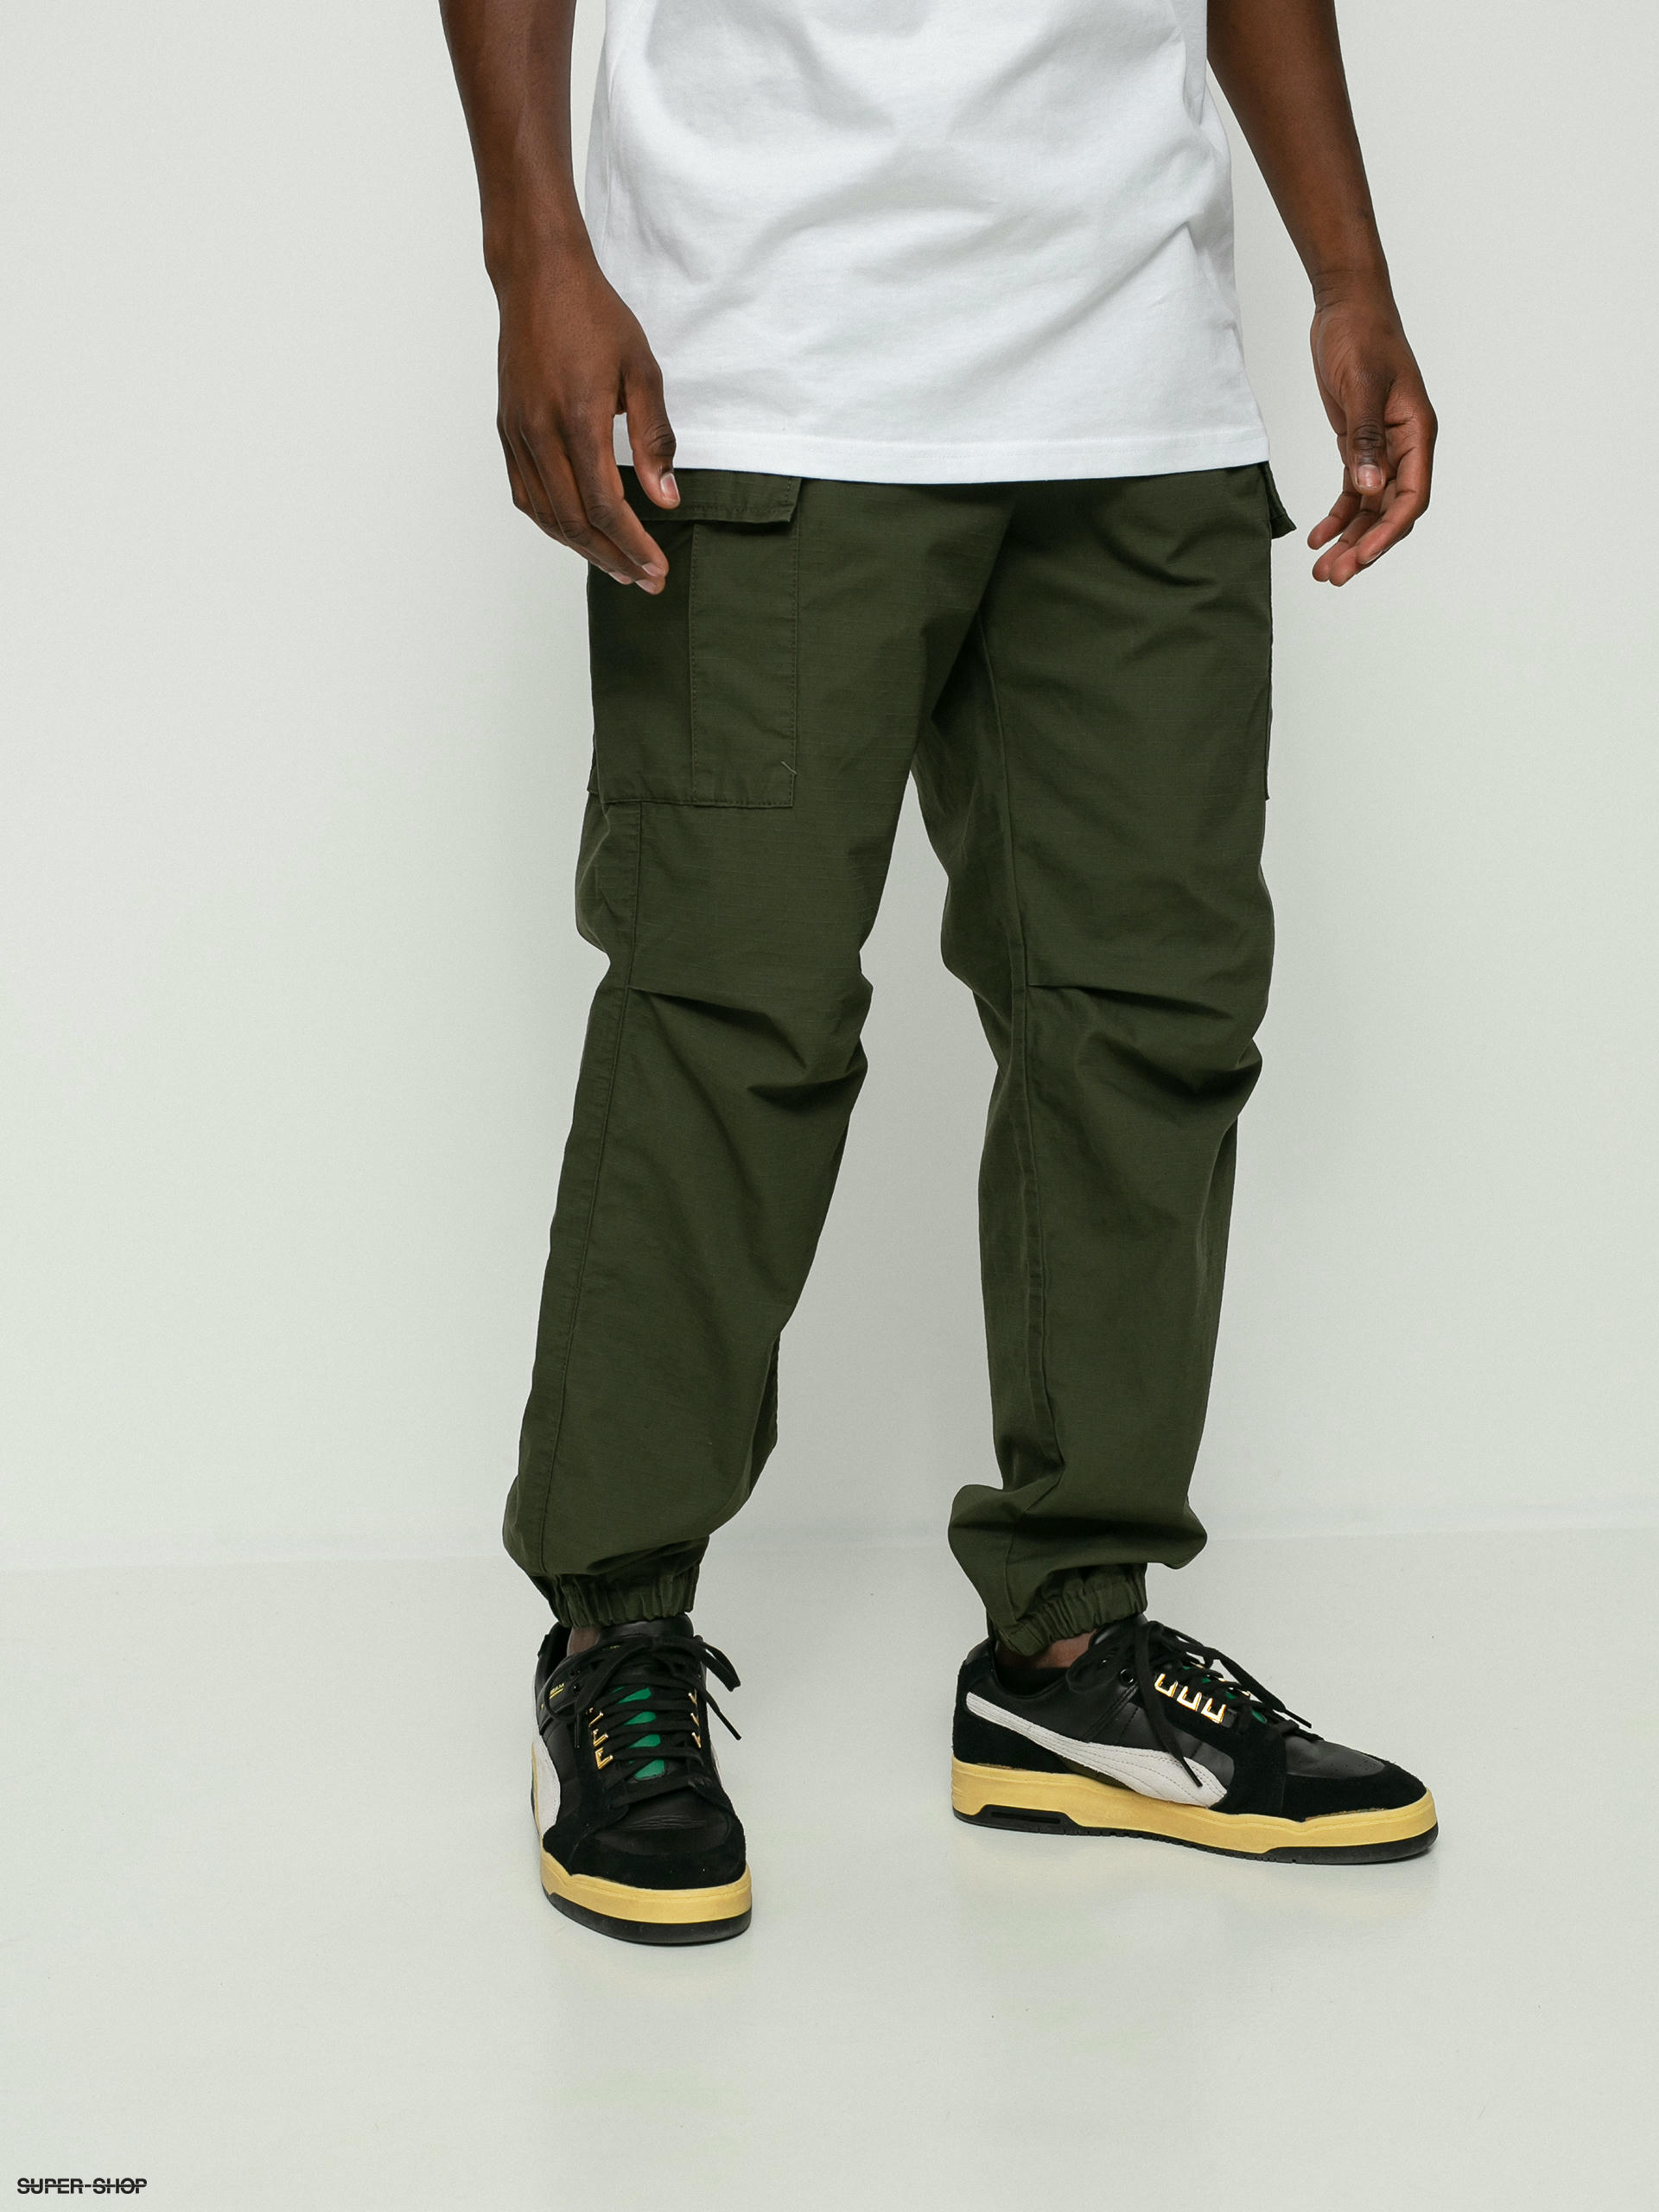 MEN'S ULTRA STRETCH ACTIVE JOGGER PANTS | UNIQLO VN